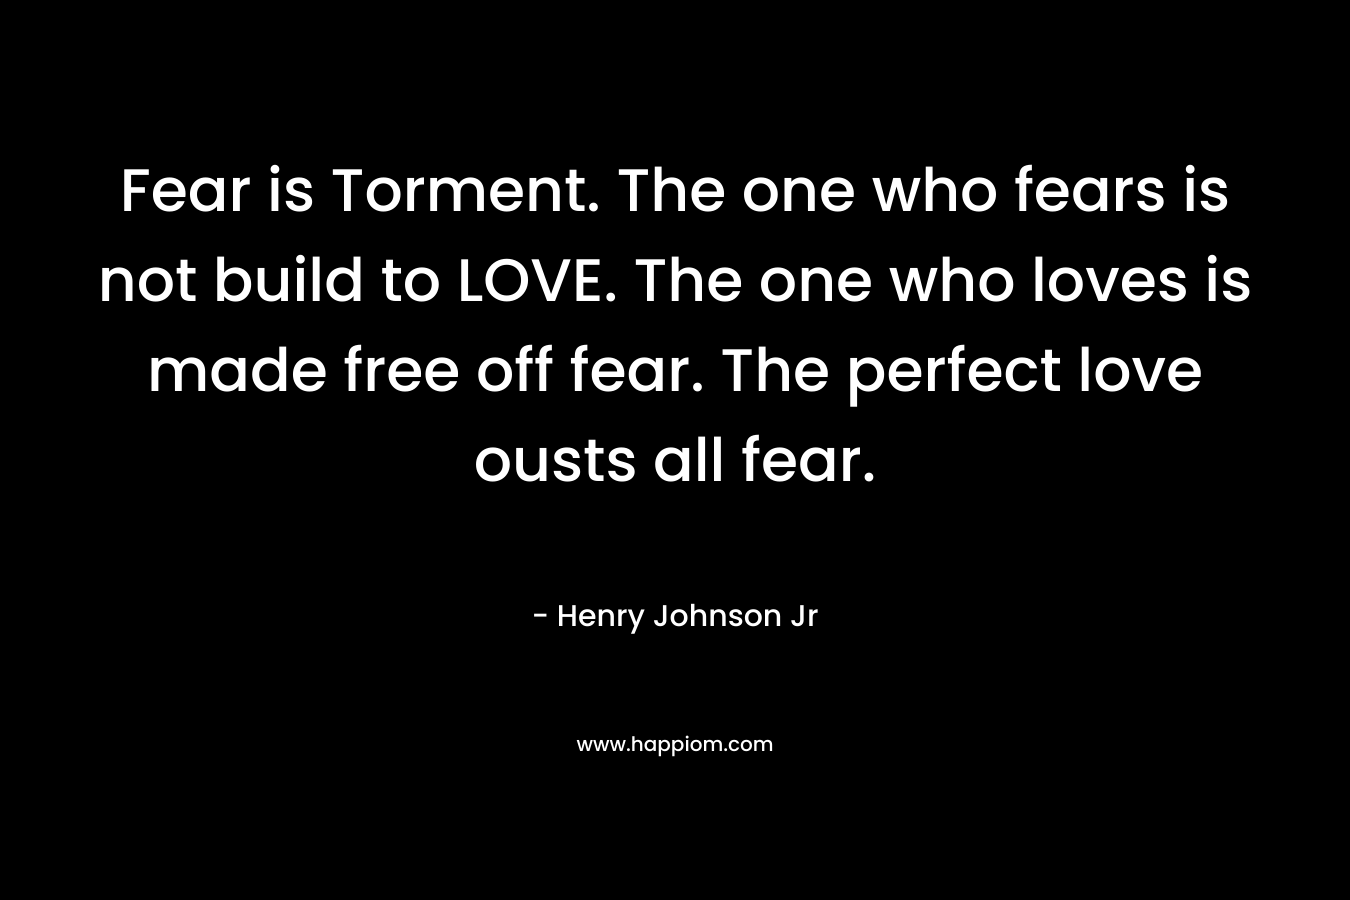 Fear is Torment. The one who fears is not build to LOVE. The one who loves is made free off fear. The perfect love ousts all fear.